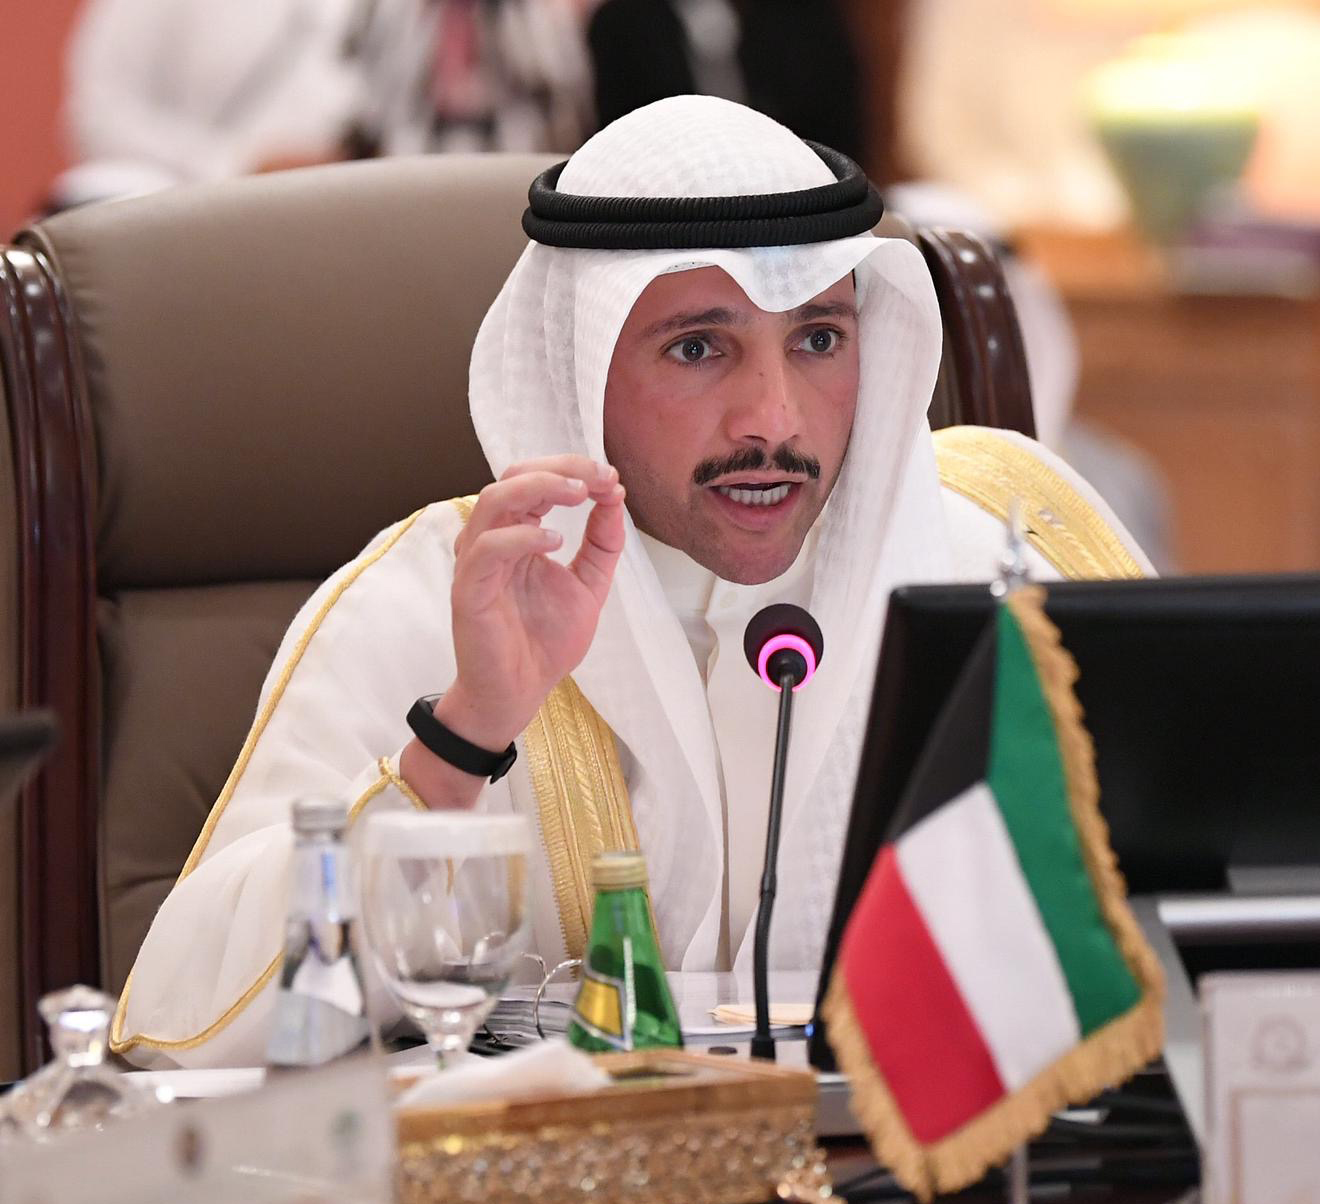 Kuwait’s parliament speaker says world should deal with issues with one standard